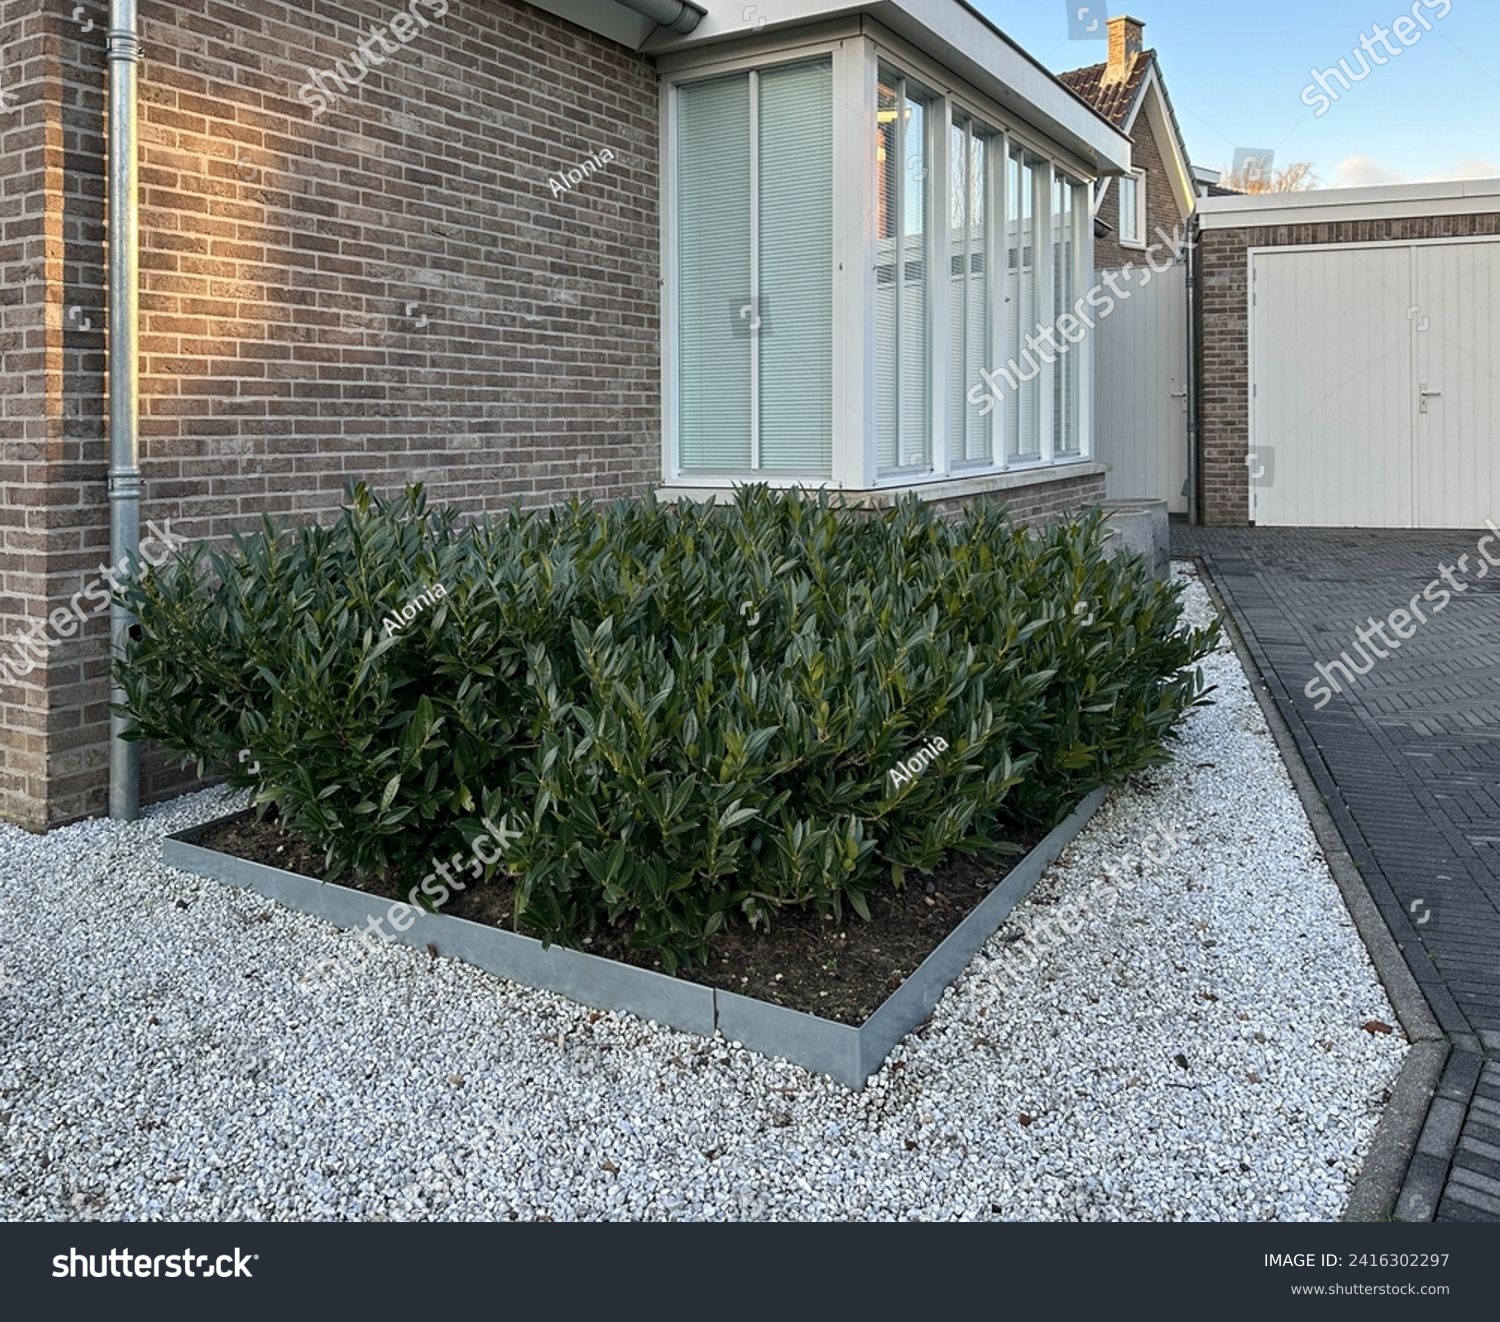 Paved front garden. Floor design with terrace tiles and ornamental gravel. Triangular flower bed with evergreen plant Prunus laurocerasus. Netherlands #2416302297